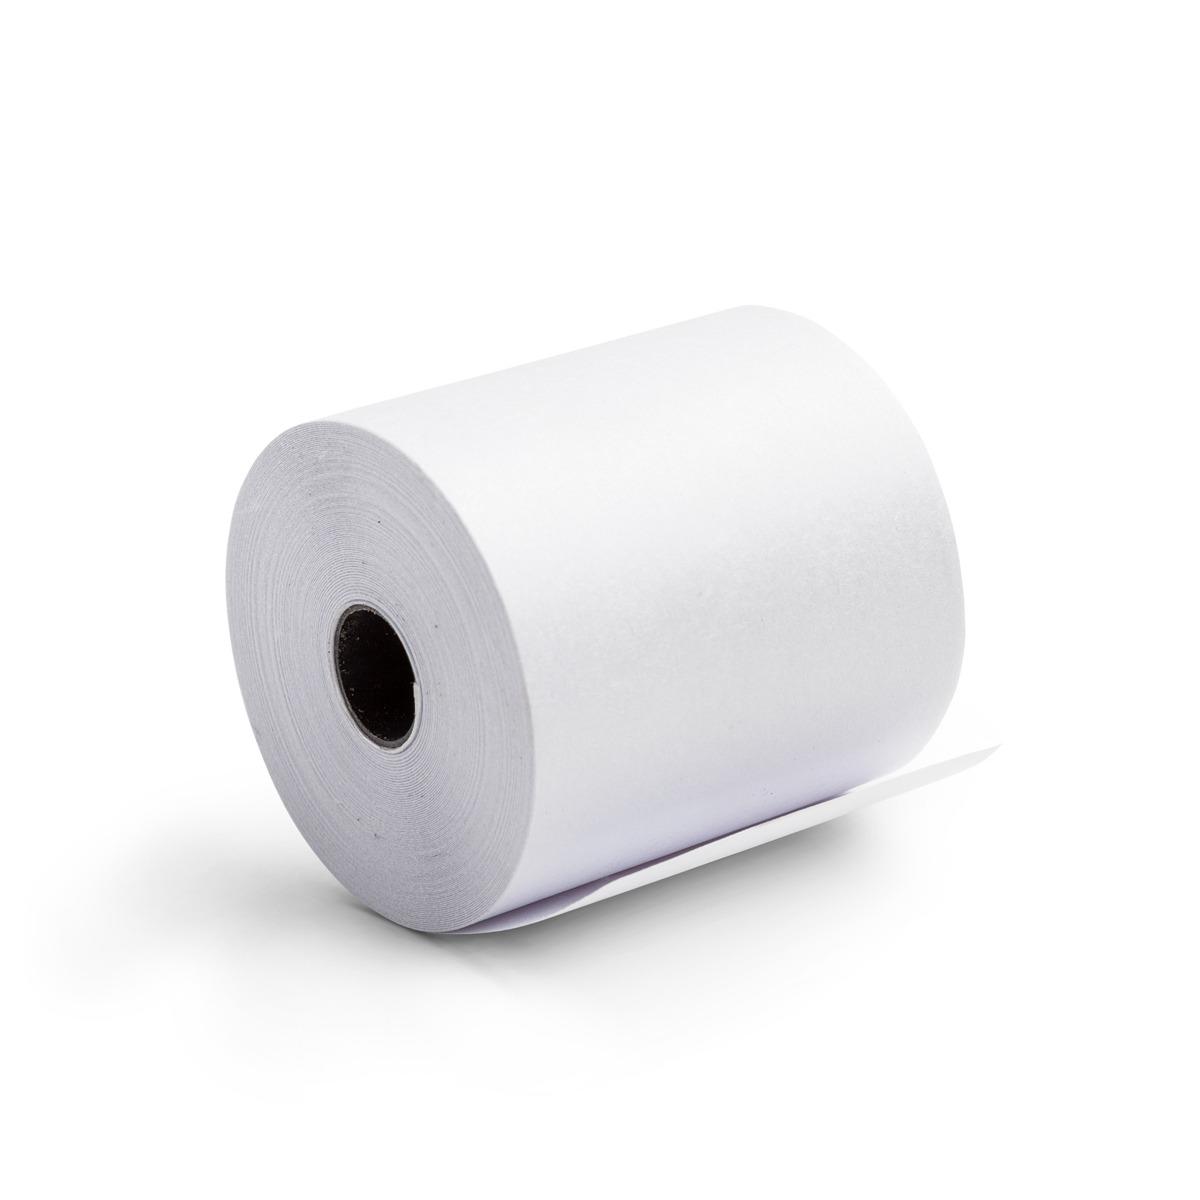 ROLLO PAPEL P/MAQ 57 MM X 30 MTS X 10 TERMICO MAUGER